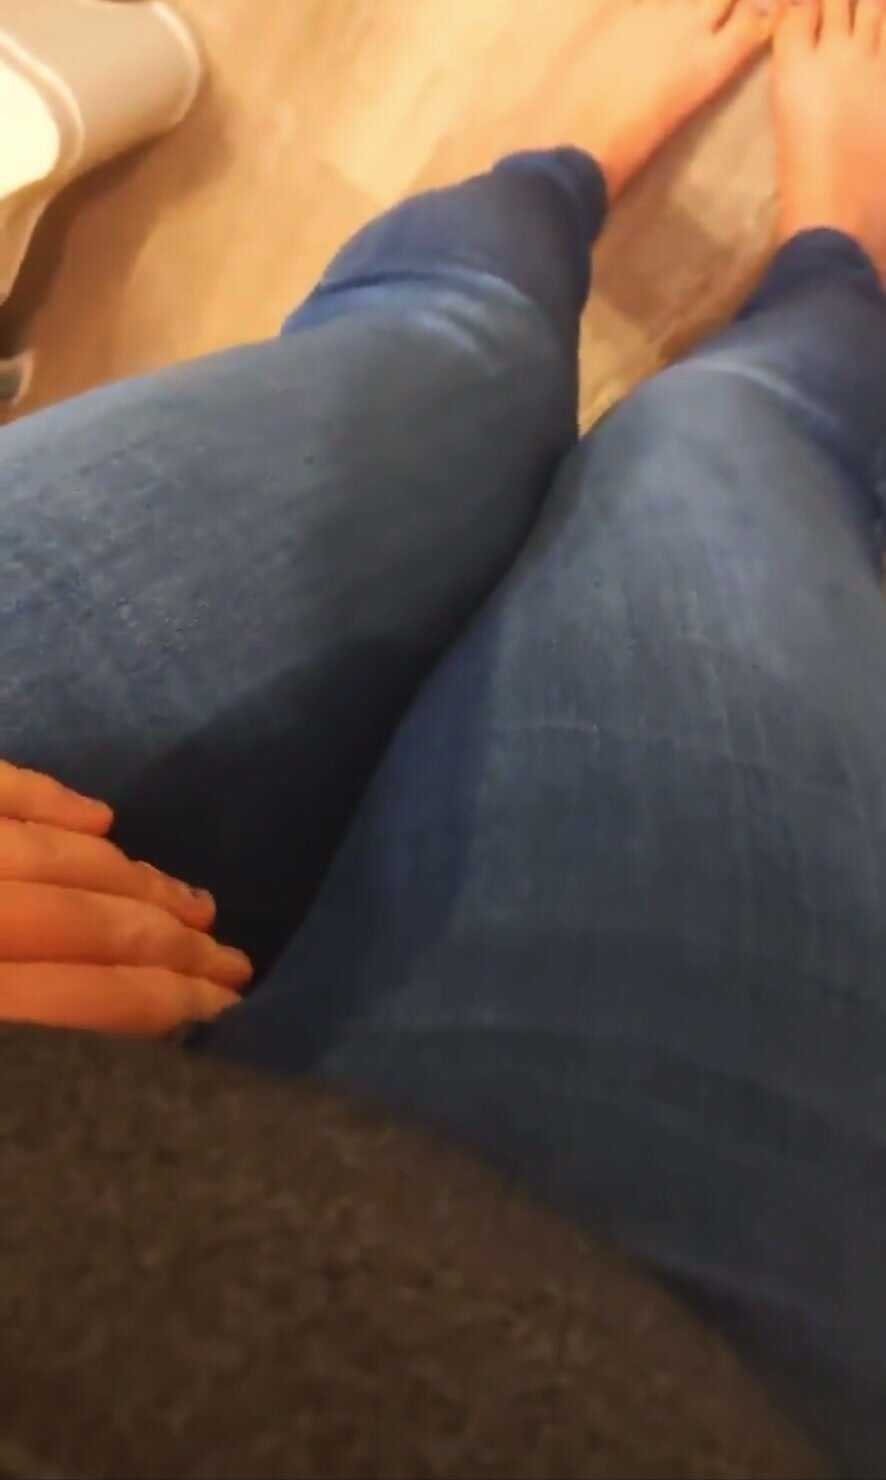 Desperation jeans wetting - video 2